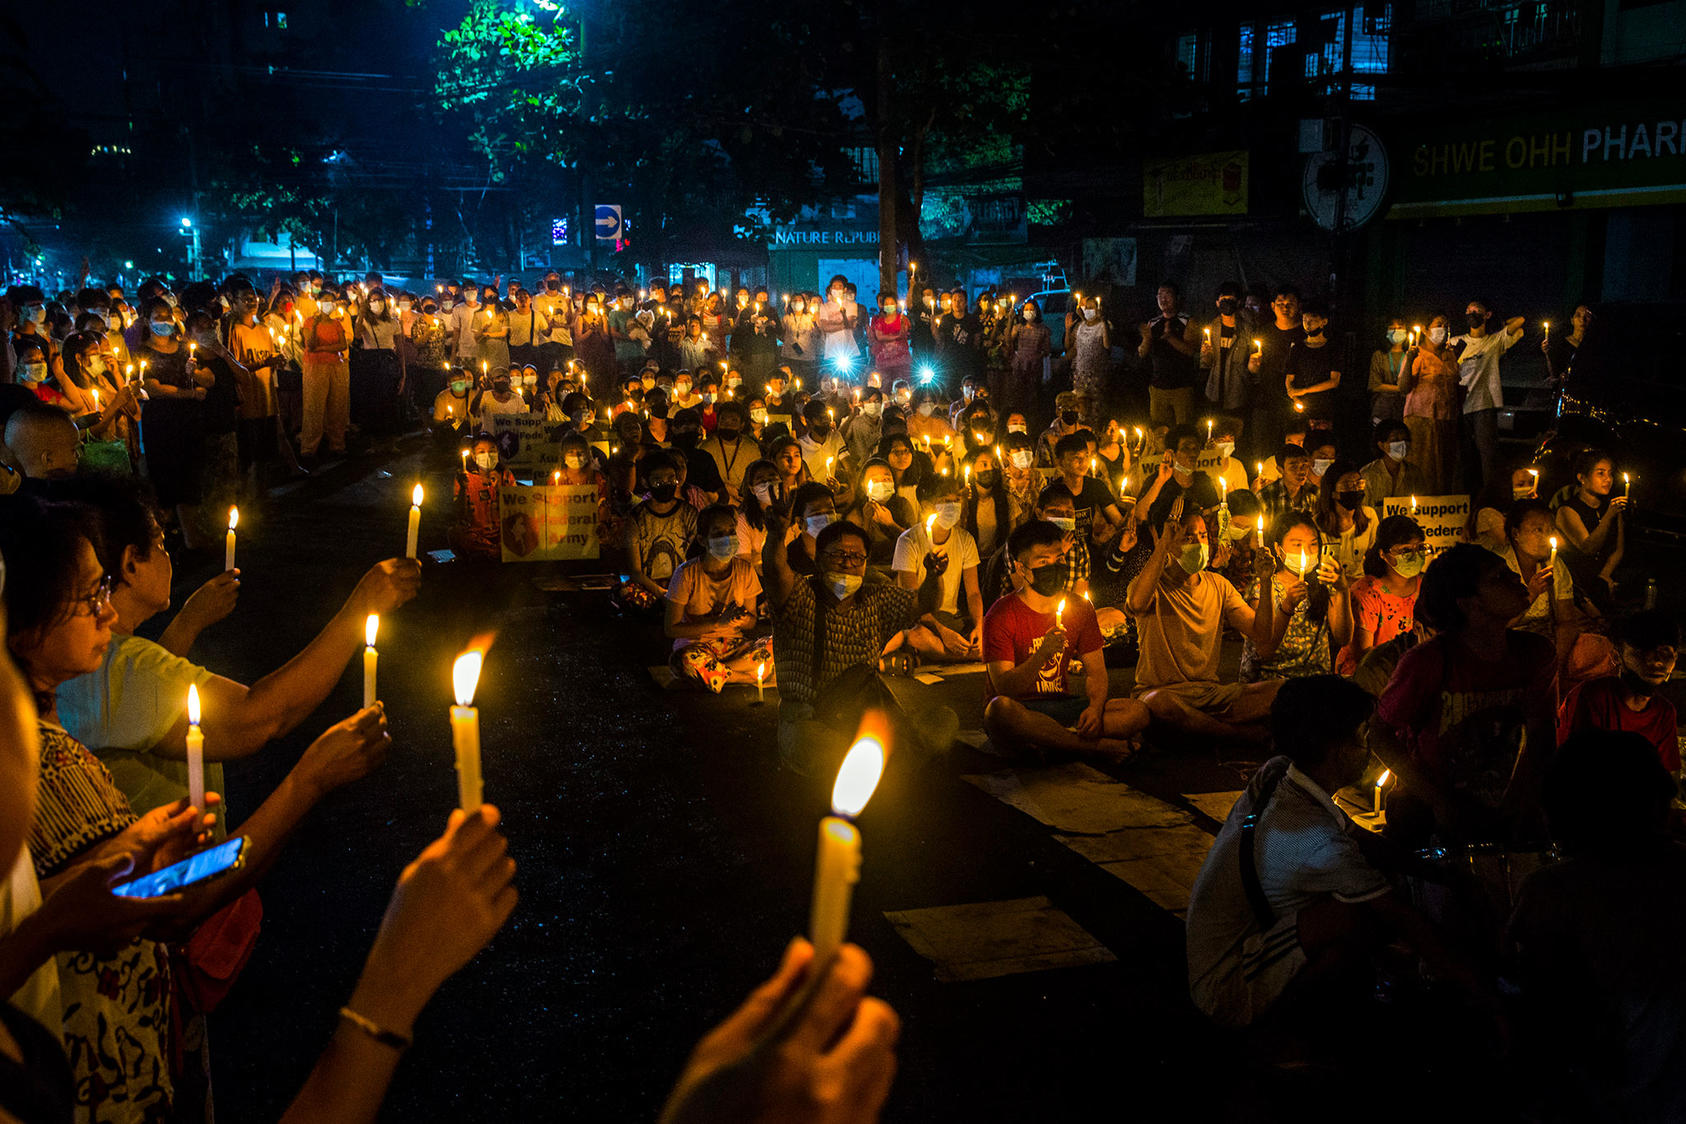 A candlelight vigil in Yangon, Myanmar, on April 3, 2021, to protest the military’s ouster of the civilian government. Since the coup in February, nearly 900 civilians have been killed. (The New York Times) 